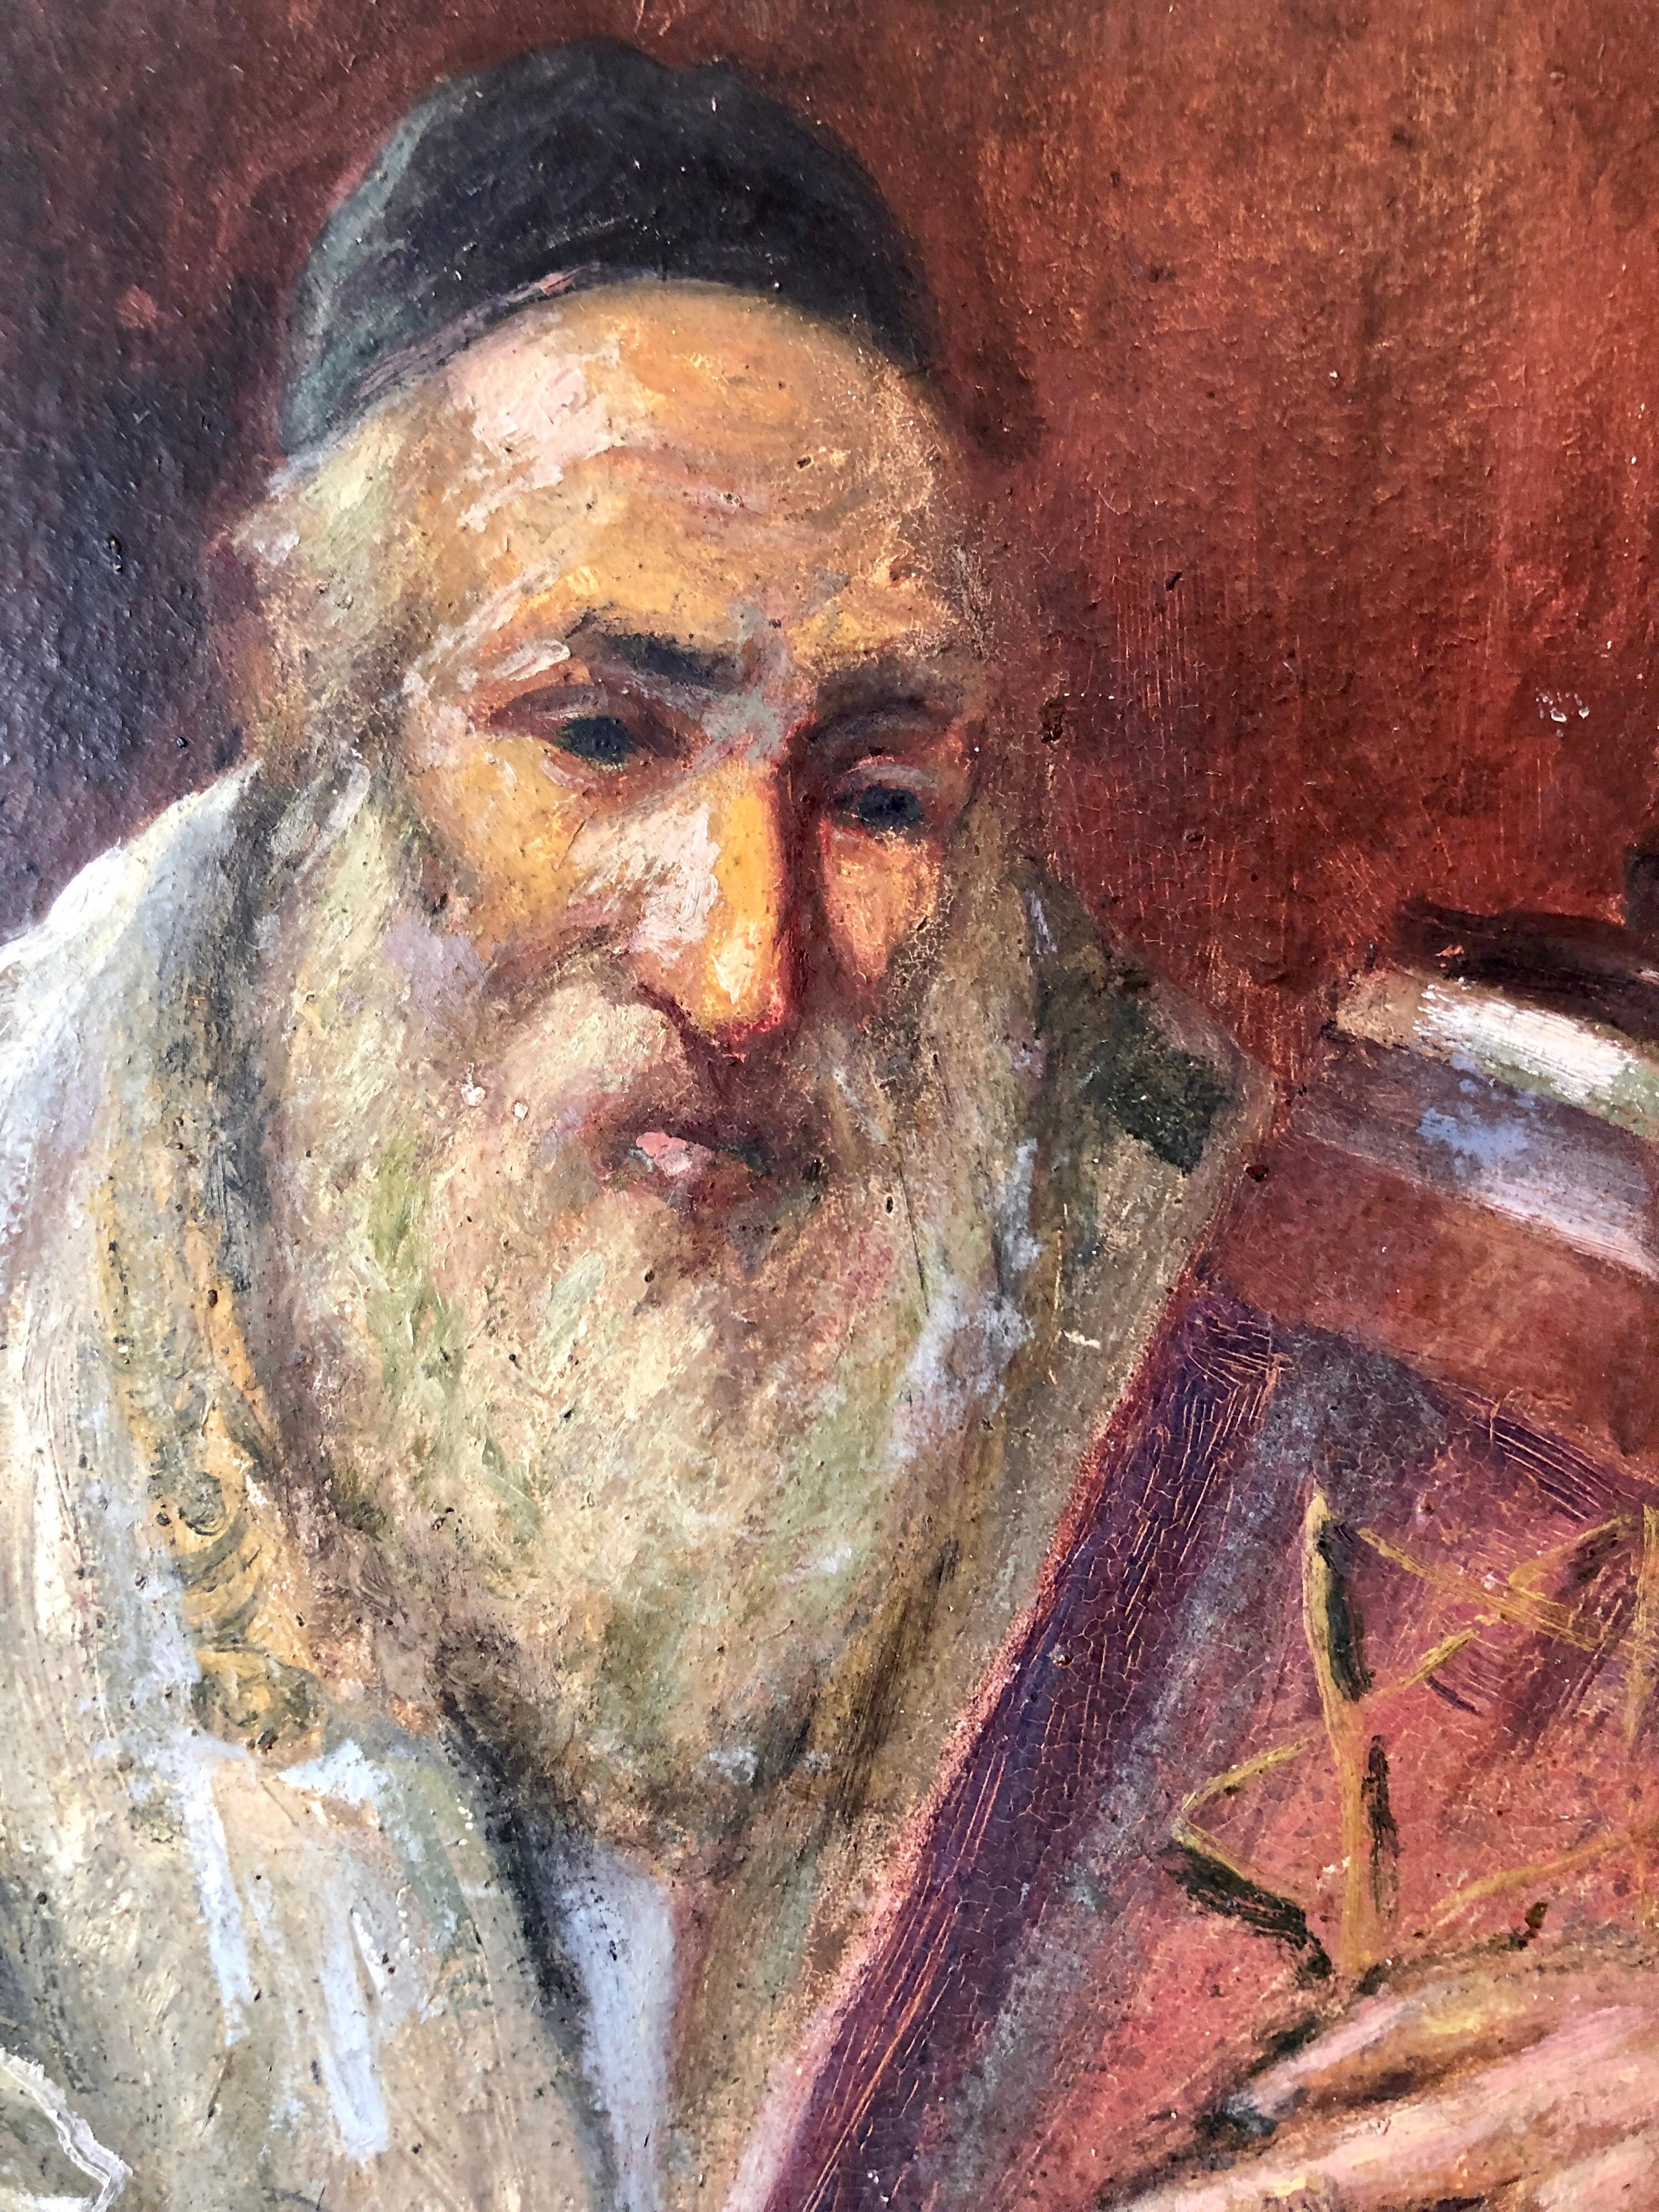 Judaic oil painting by Krakow, Poland born artist Mark Siegband.
Signed and framed, An elderly Hasidic rabbi holding a Torah.
He is one of many great Jewish Polish artists that included Leopold Gottlieb, Maurycy Gottlieb, Henryk Hechtkopf, Leopold